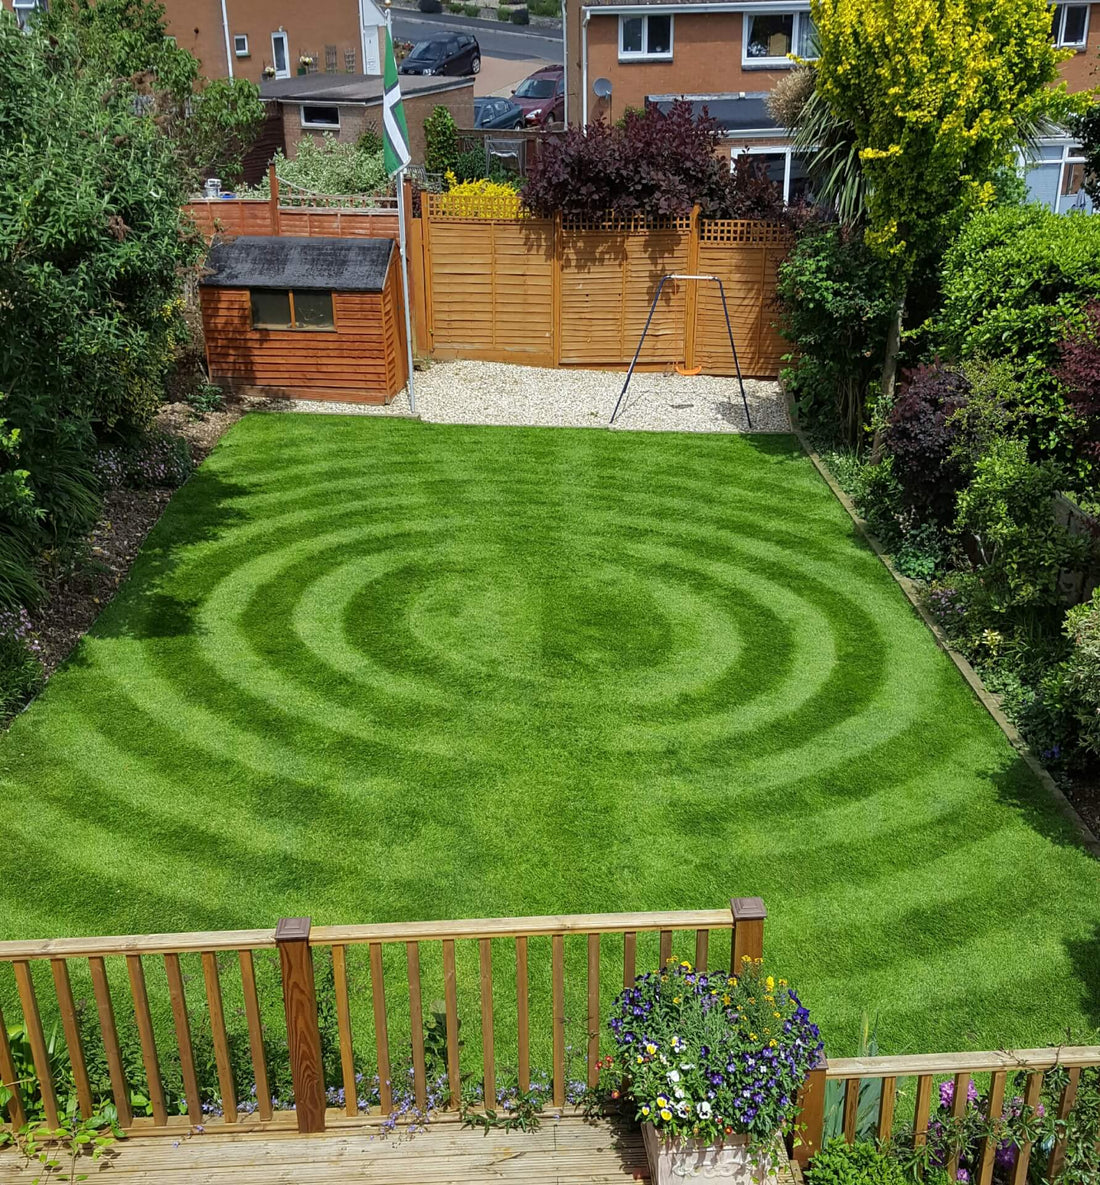 Third place winner Allett creative lawn stripes competition